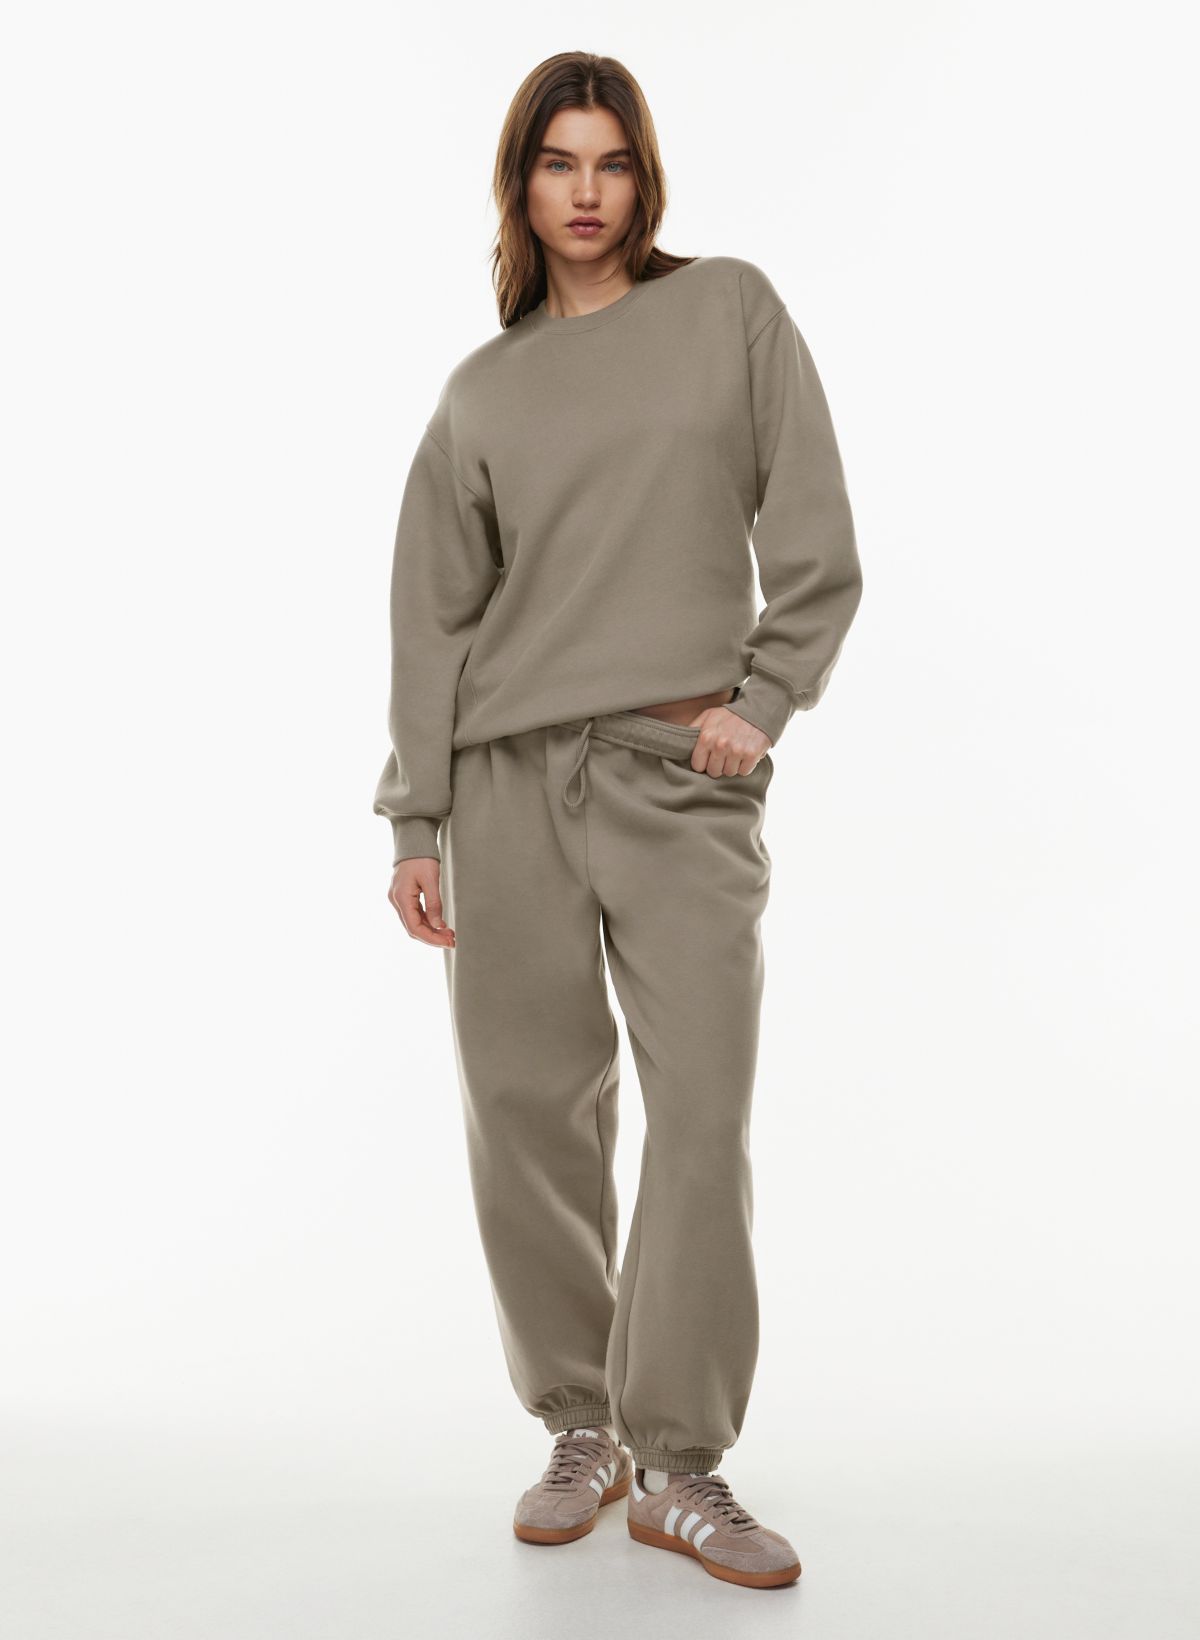 J.Crew High Rise Girlfriend Chino Size 2 - $22 New With Tags - From Cara